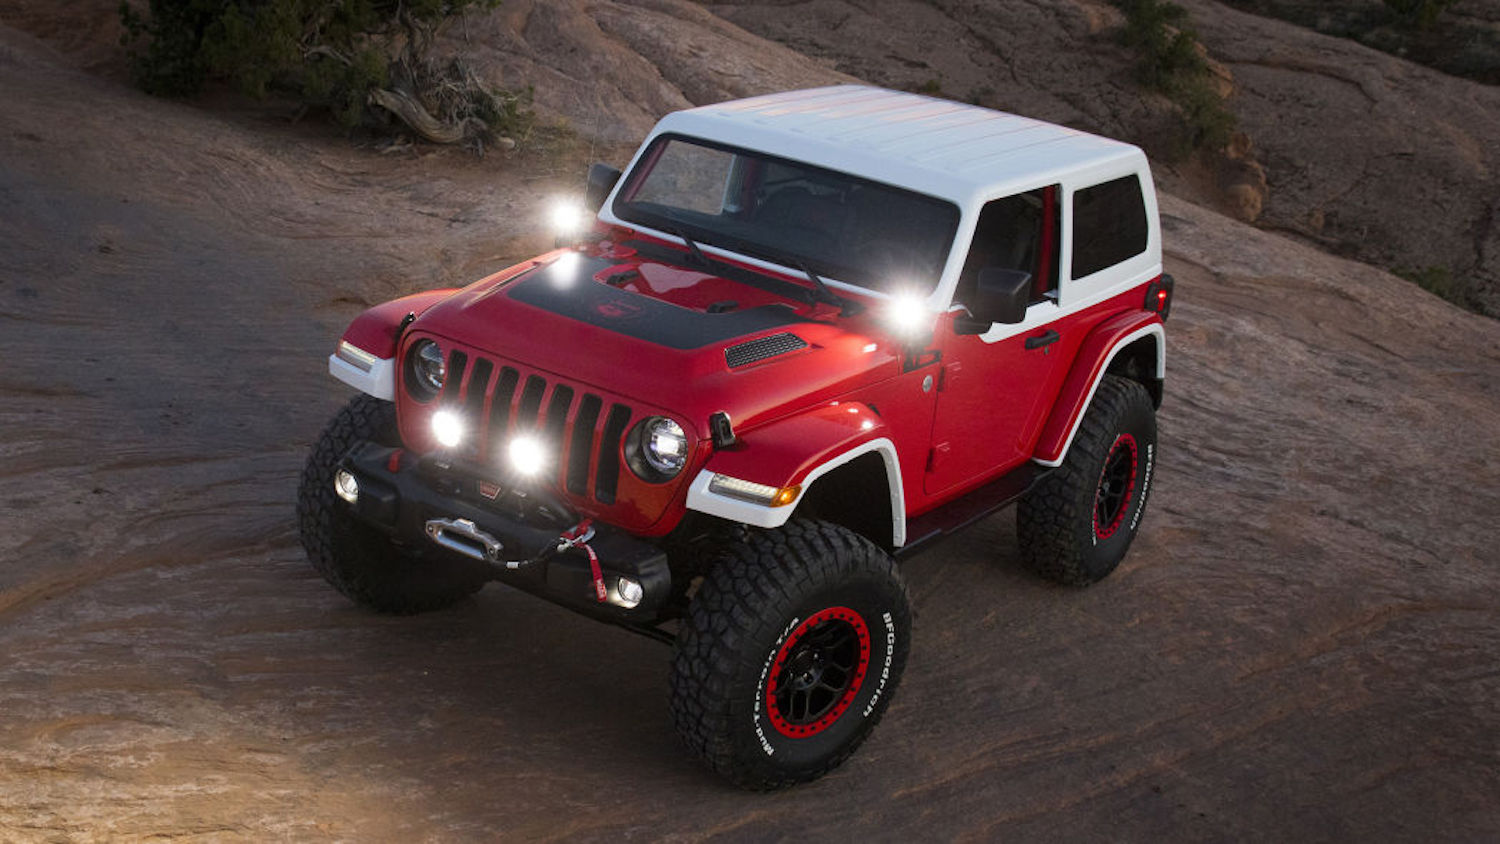 You Can Customize Your New Jeep Wrangler From the Factory